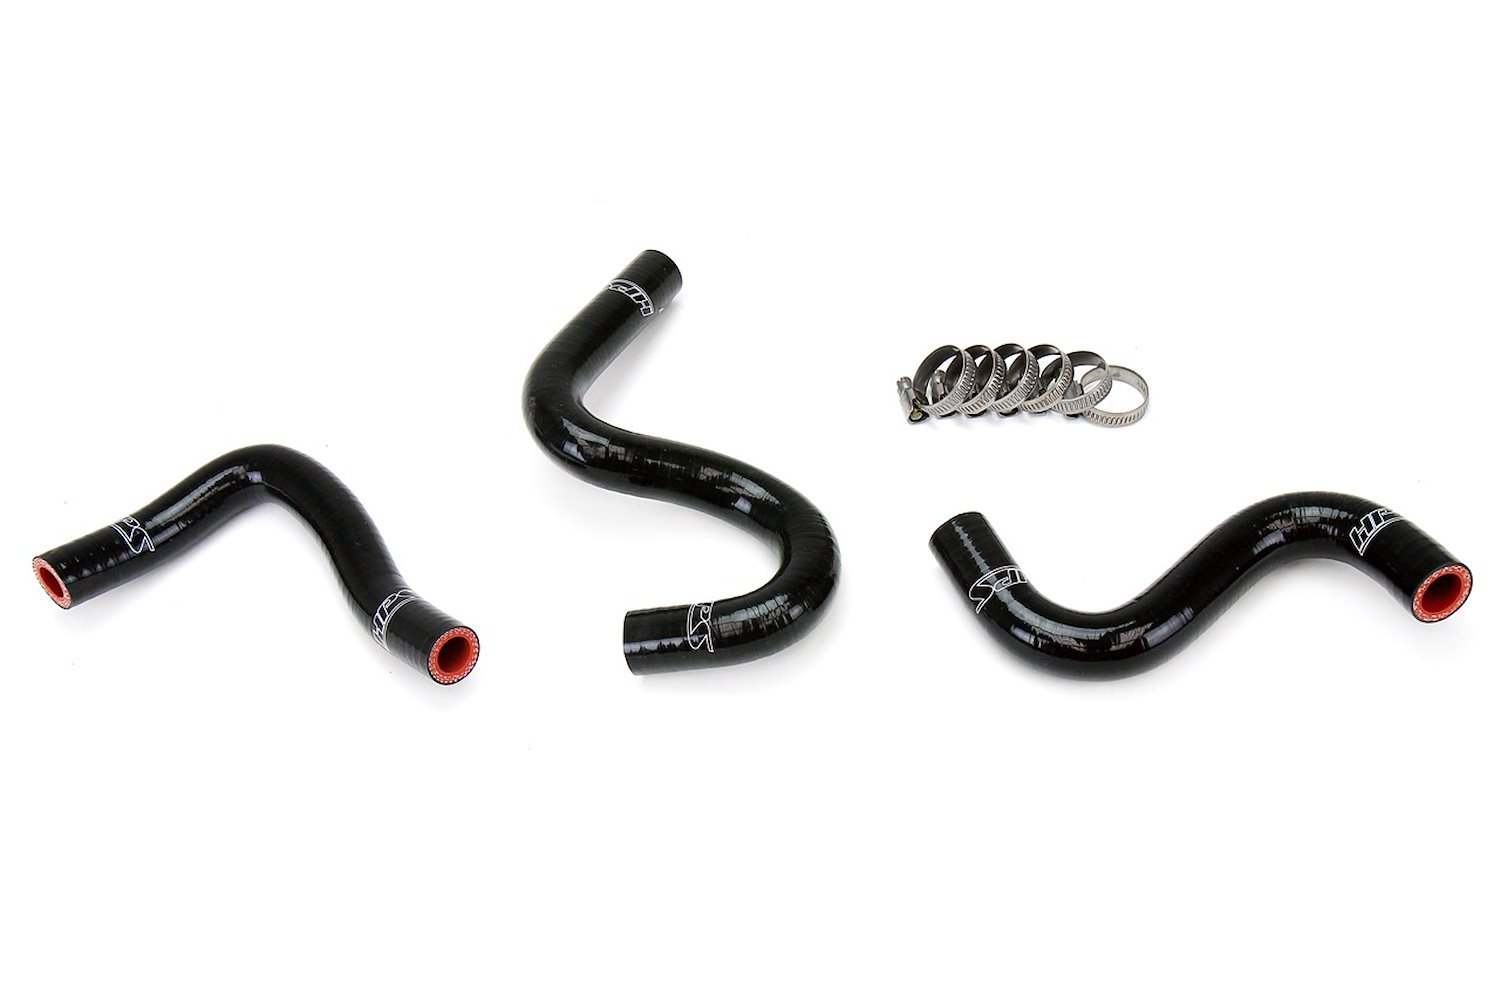 57-1223-BLK Heater Hose Kit, High-Temp 3-Ply Reinforced Silicone, Replace OEM Rubber Heater Coolant Hoses